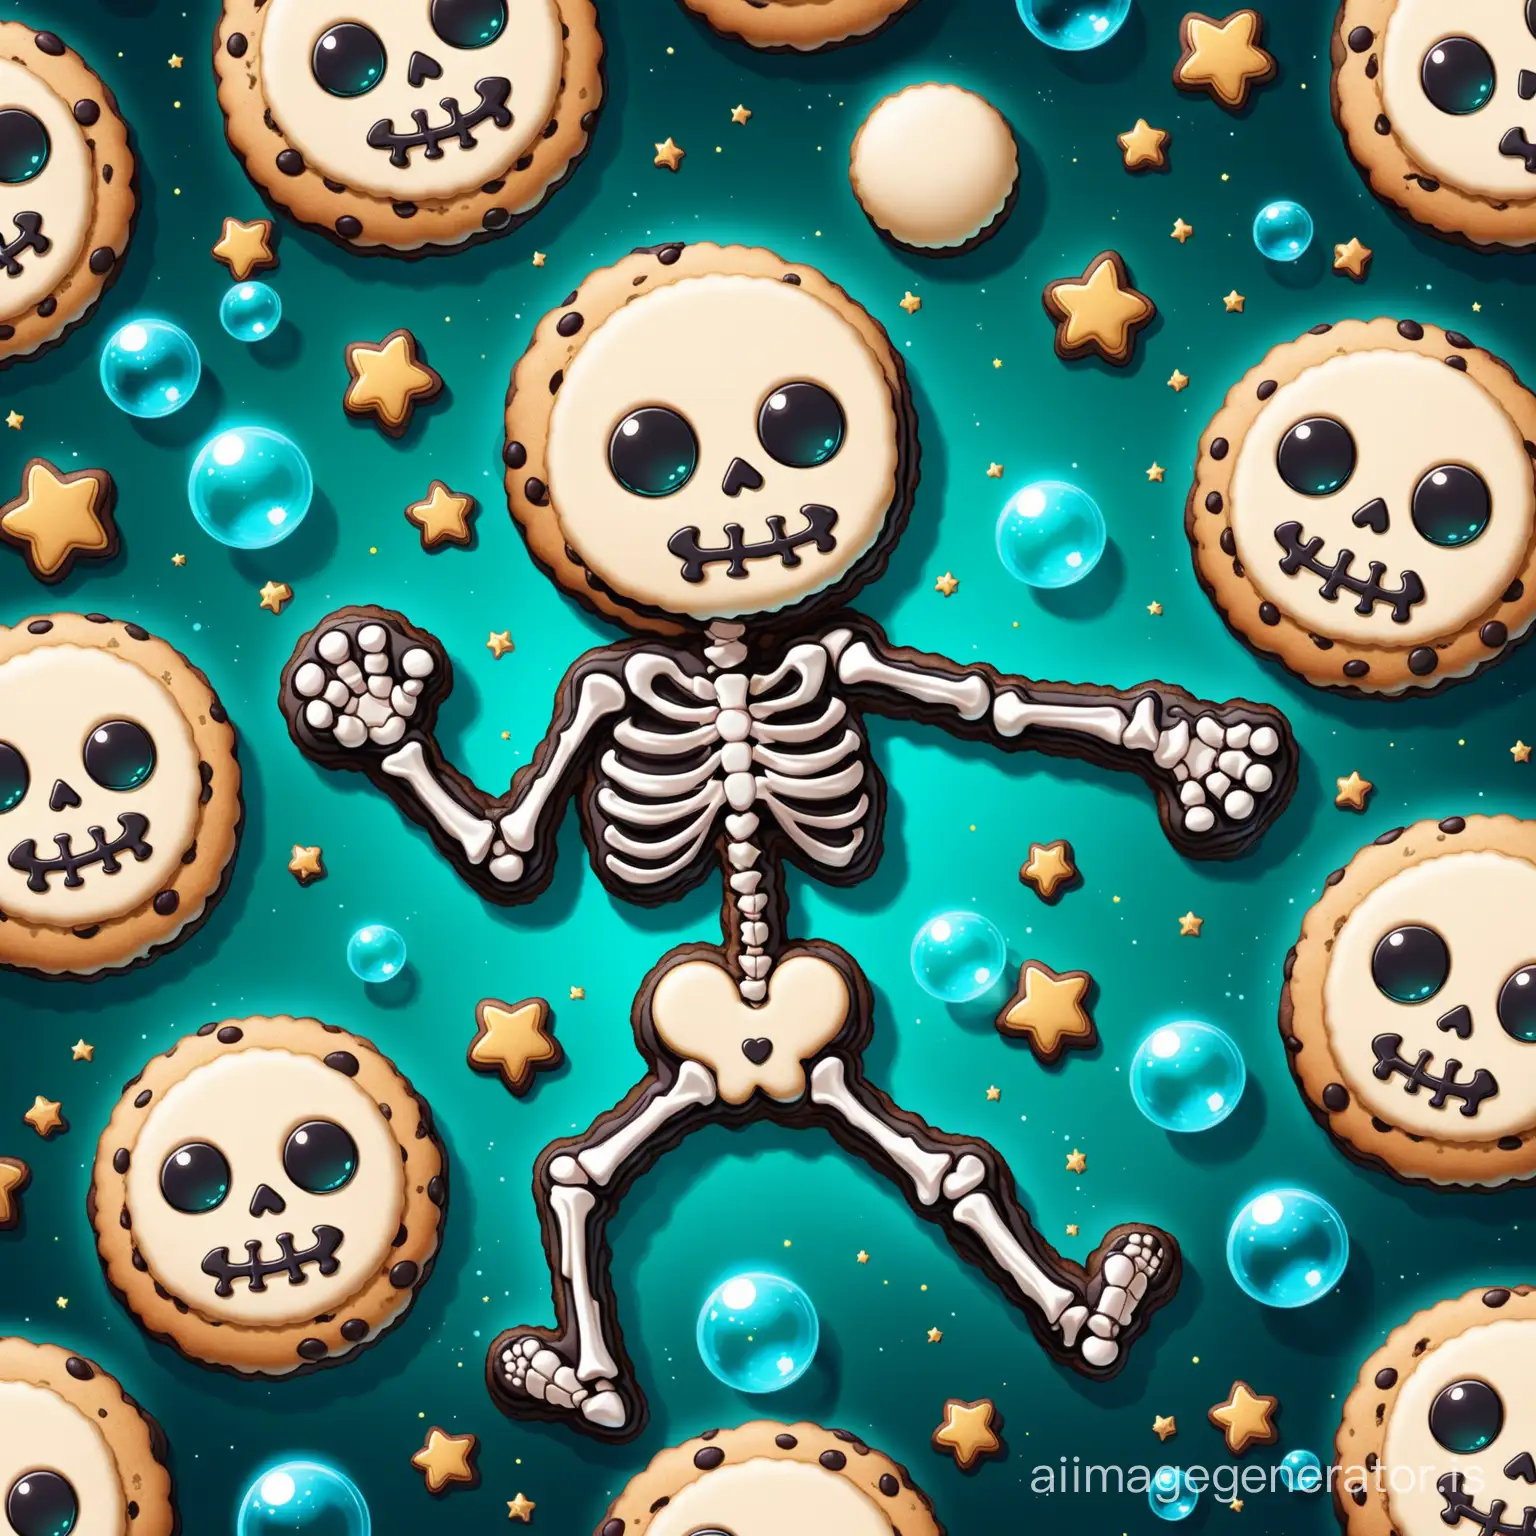 Cheerful-Flying-Skeleton-Cookie-in-Vibrant-Jungle-Setting-with-Blue-Bubble